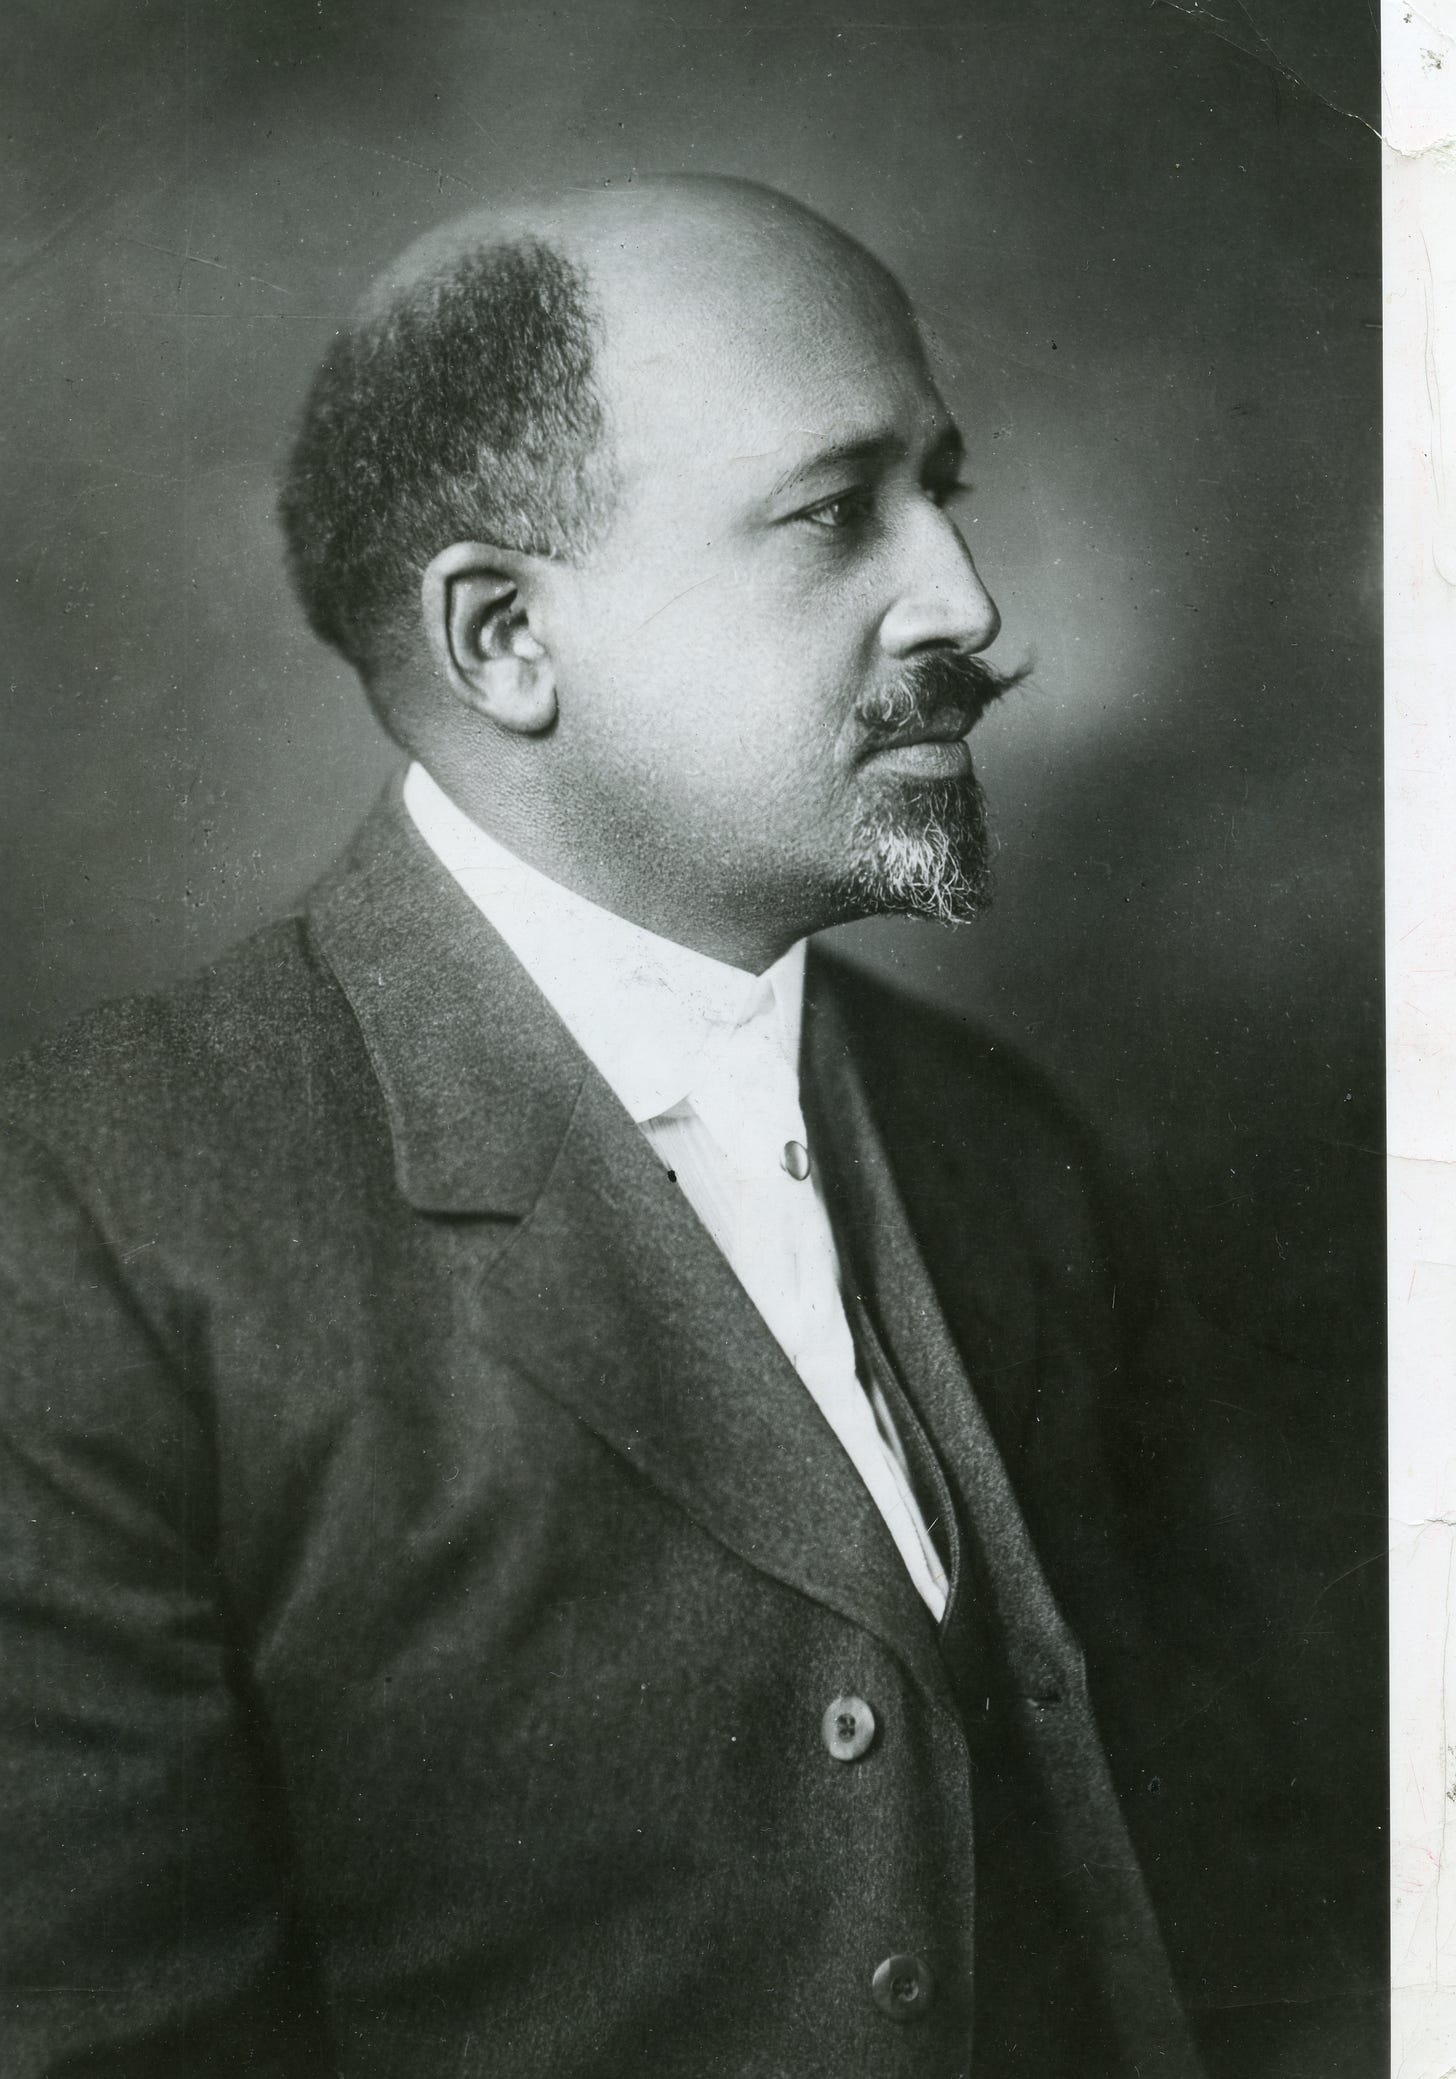 A black-and-while portrait (in profile) of author W.E.B. Du Bois.